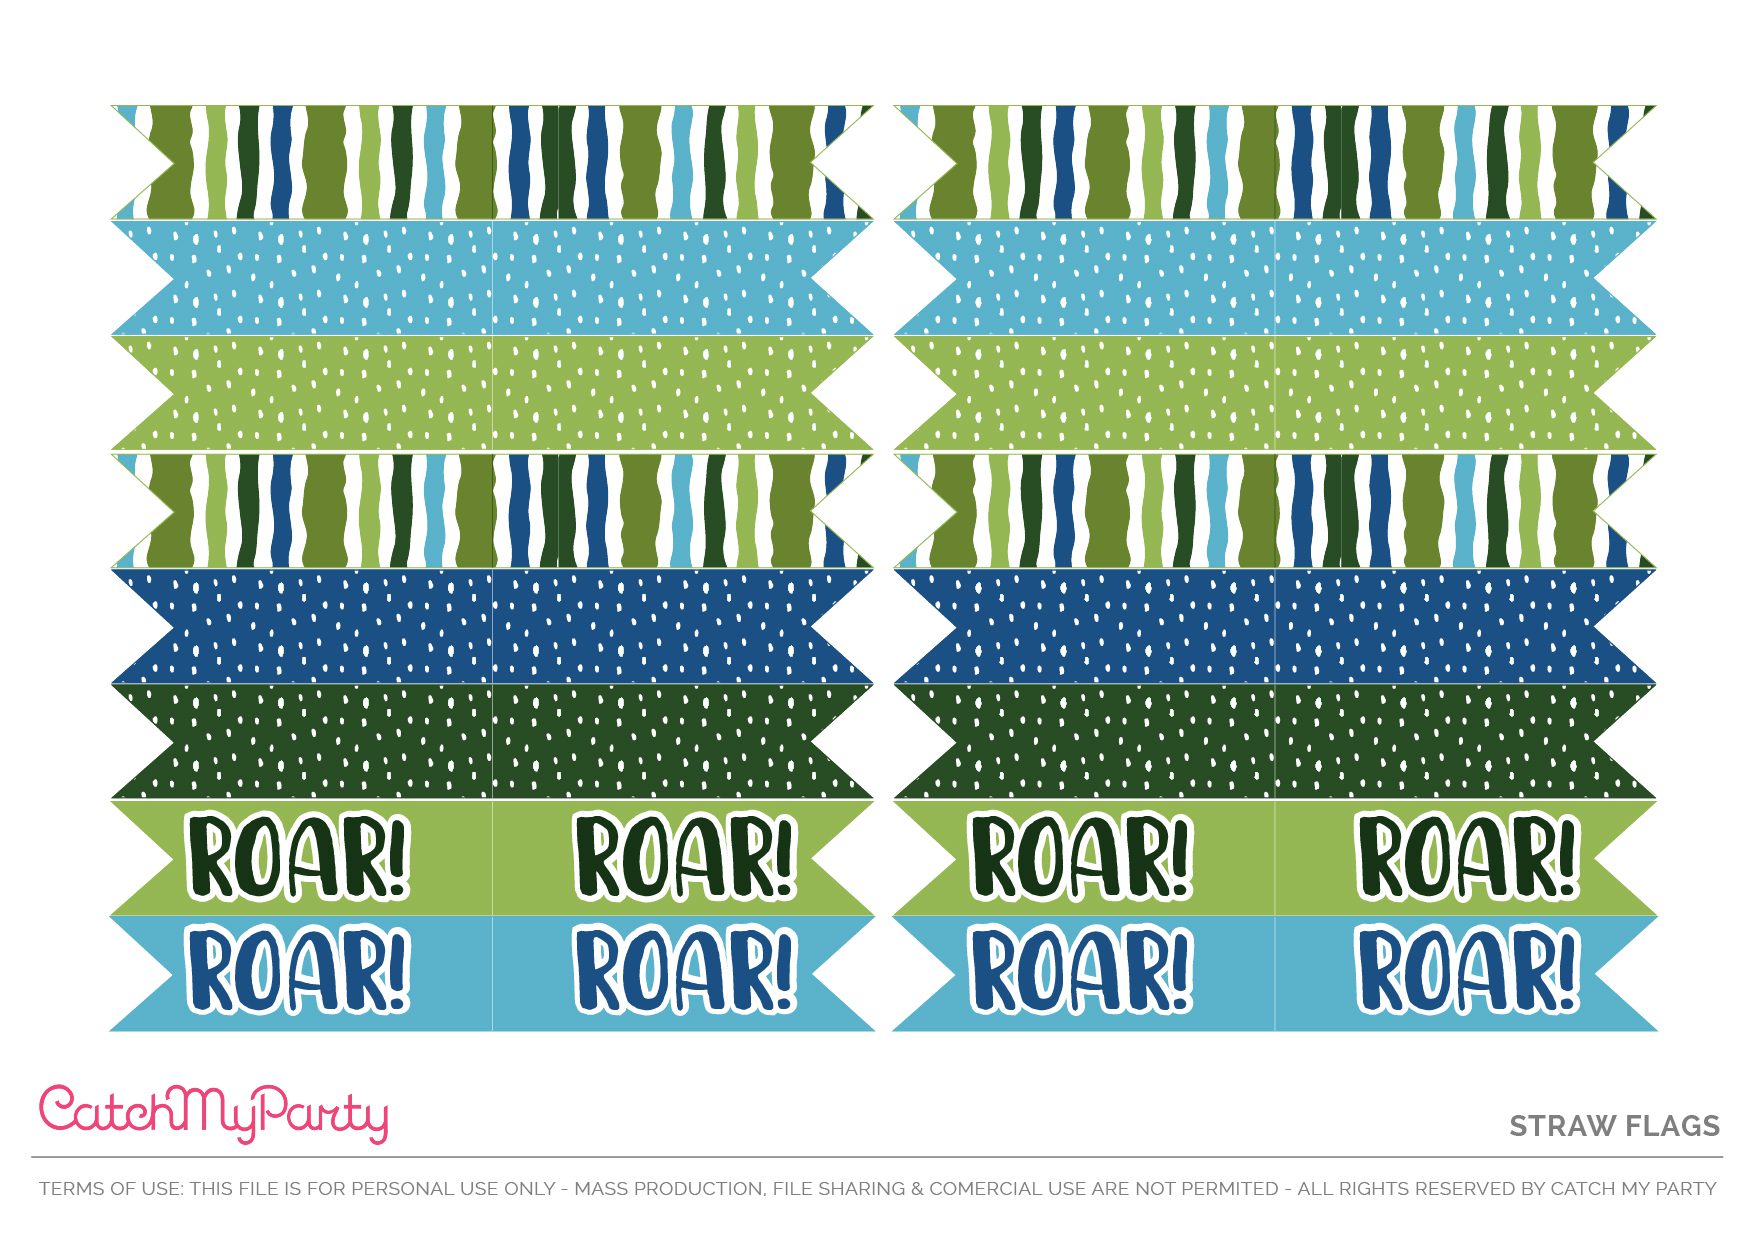 Download These Free Dinosaur Party Printables - Straw Flags